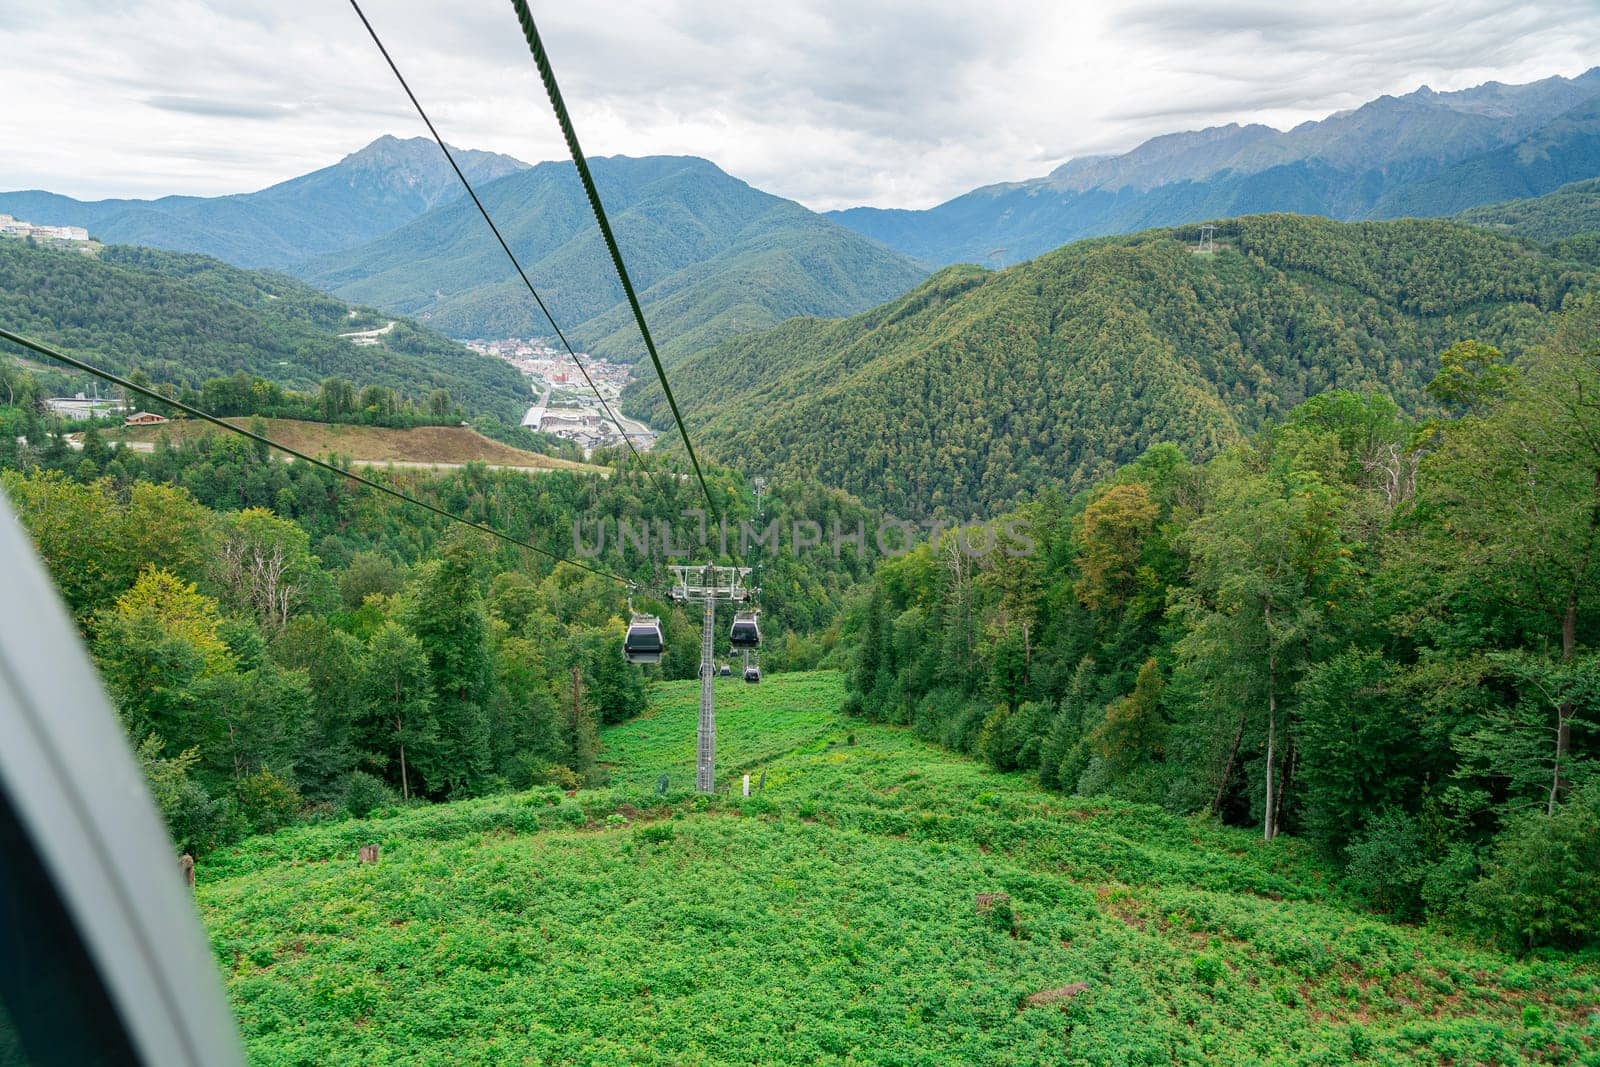 lifts of the mountain cable car on the background of mountains by roman112007